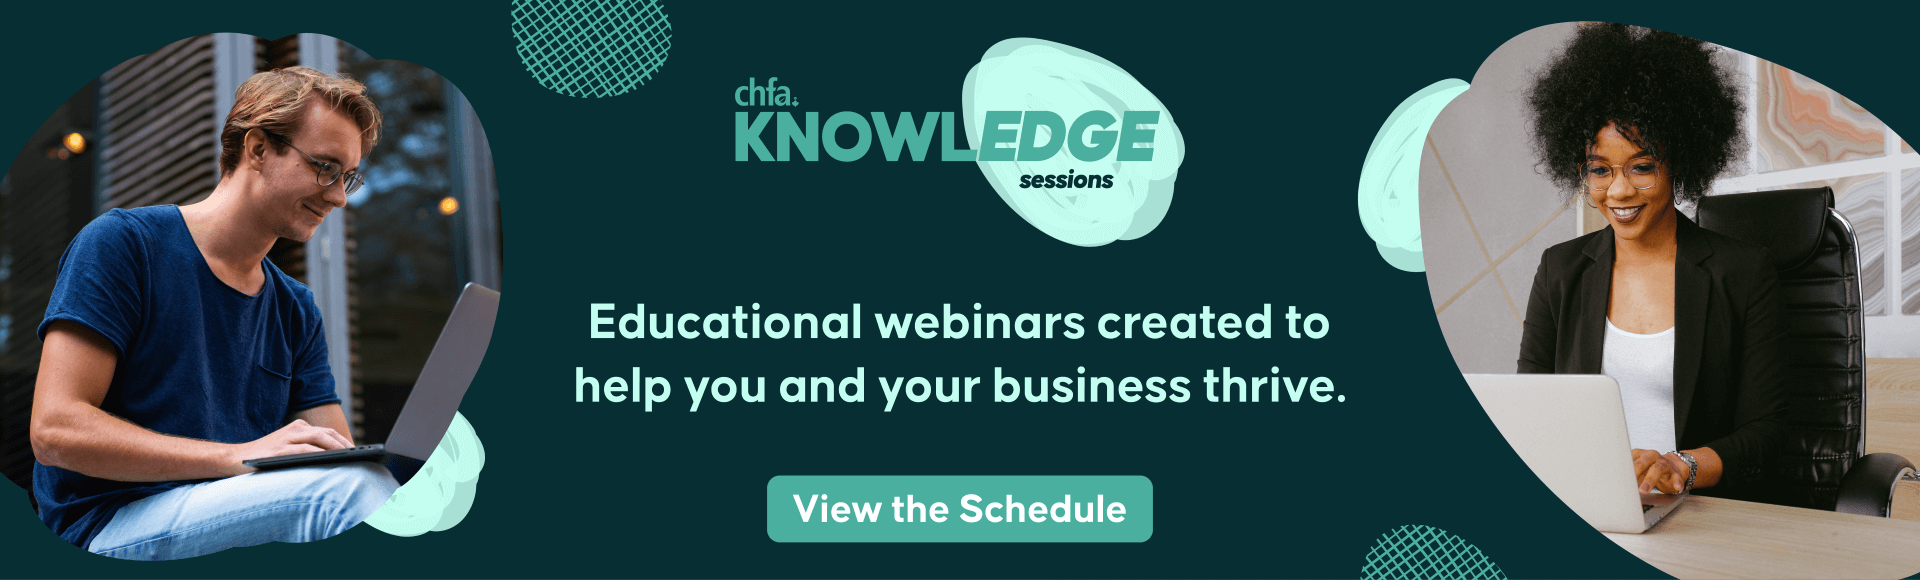 Educational webinars created to help you and your business thrive